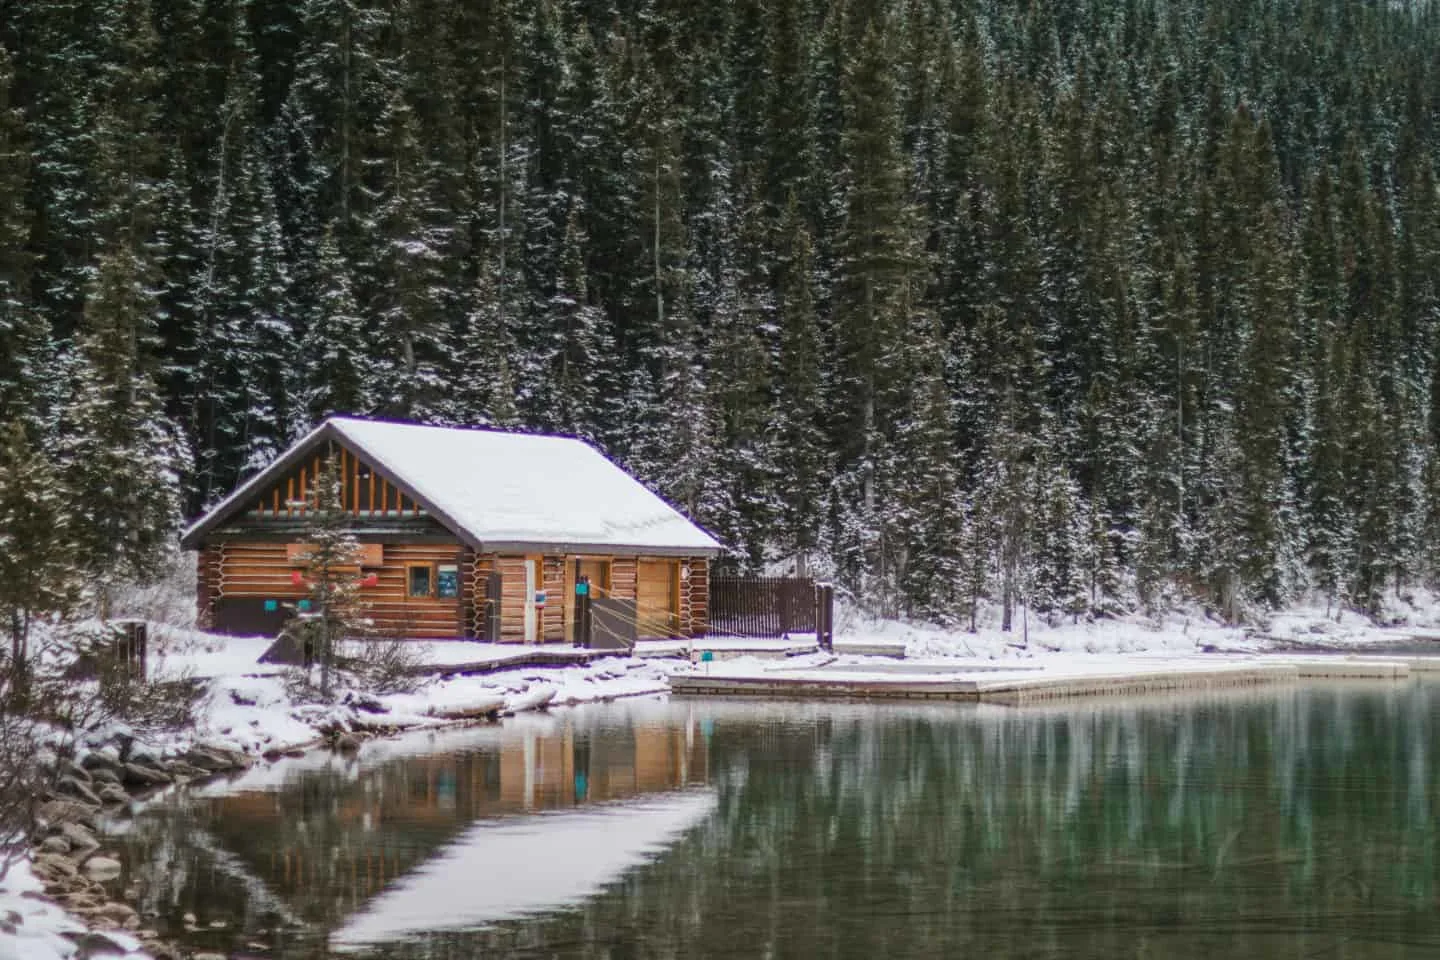 Top things to do in Jasper and Banff National Park in Banff, Alberta in the winter | Banff, Alberta travel guide | what to do in Jasper & Banff, Canada | best Banff travel itinerary | best places to visit in Canada during the winter | where to go in Canada during the holidays | how to spend 3 days in Banff National Park | Diary of a Toronto Girl, a Toronto lifestyle blog